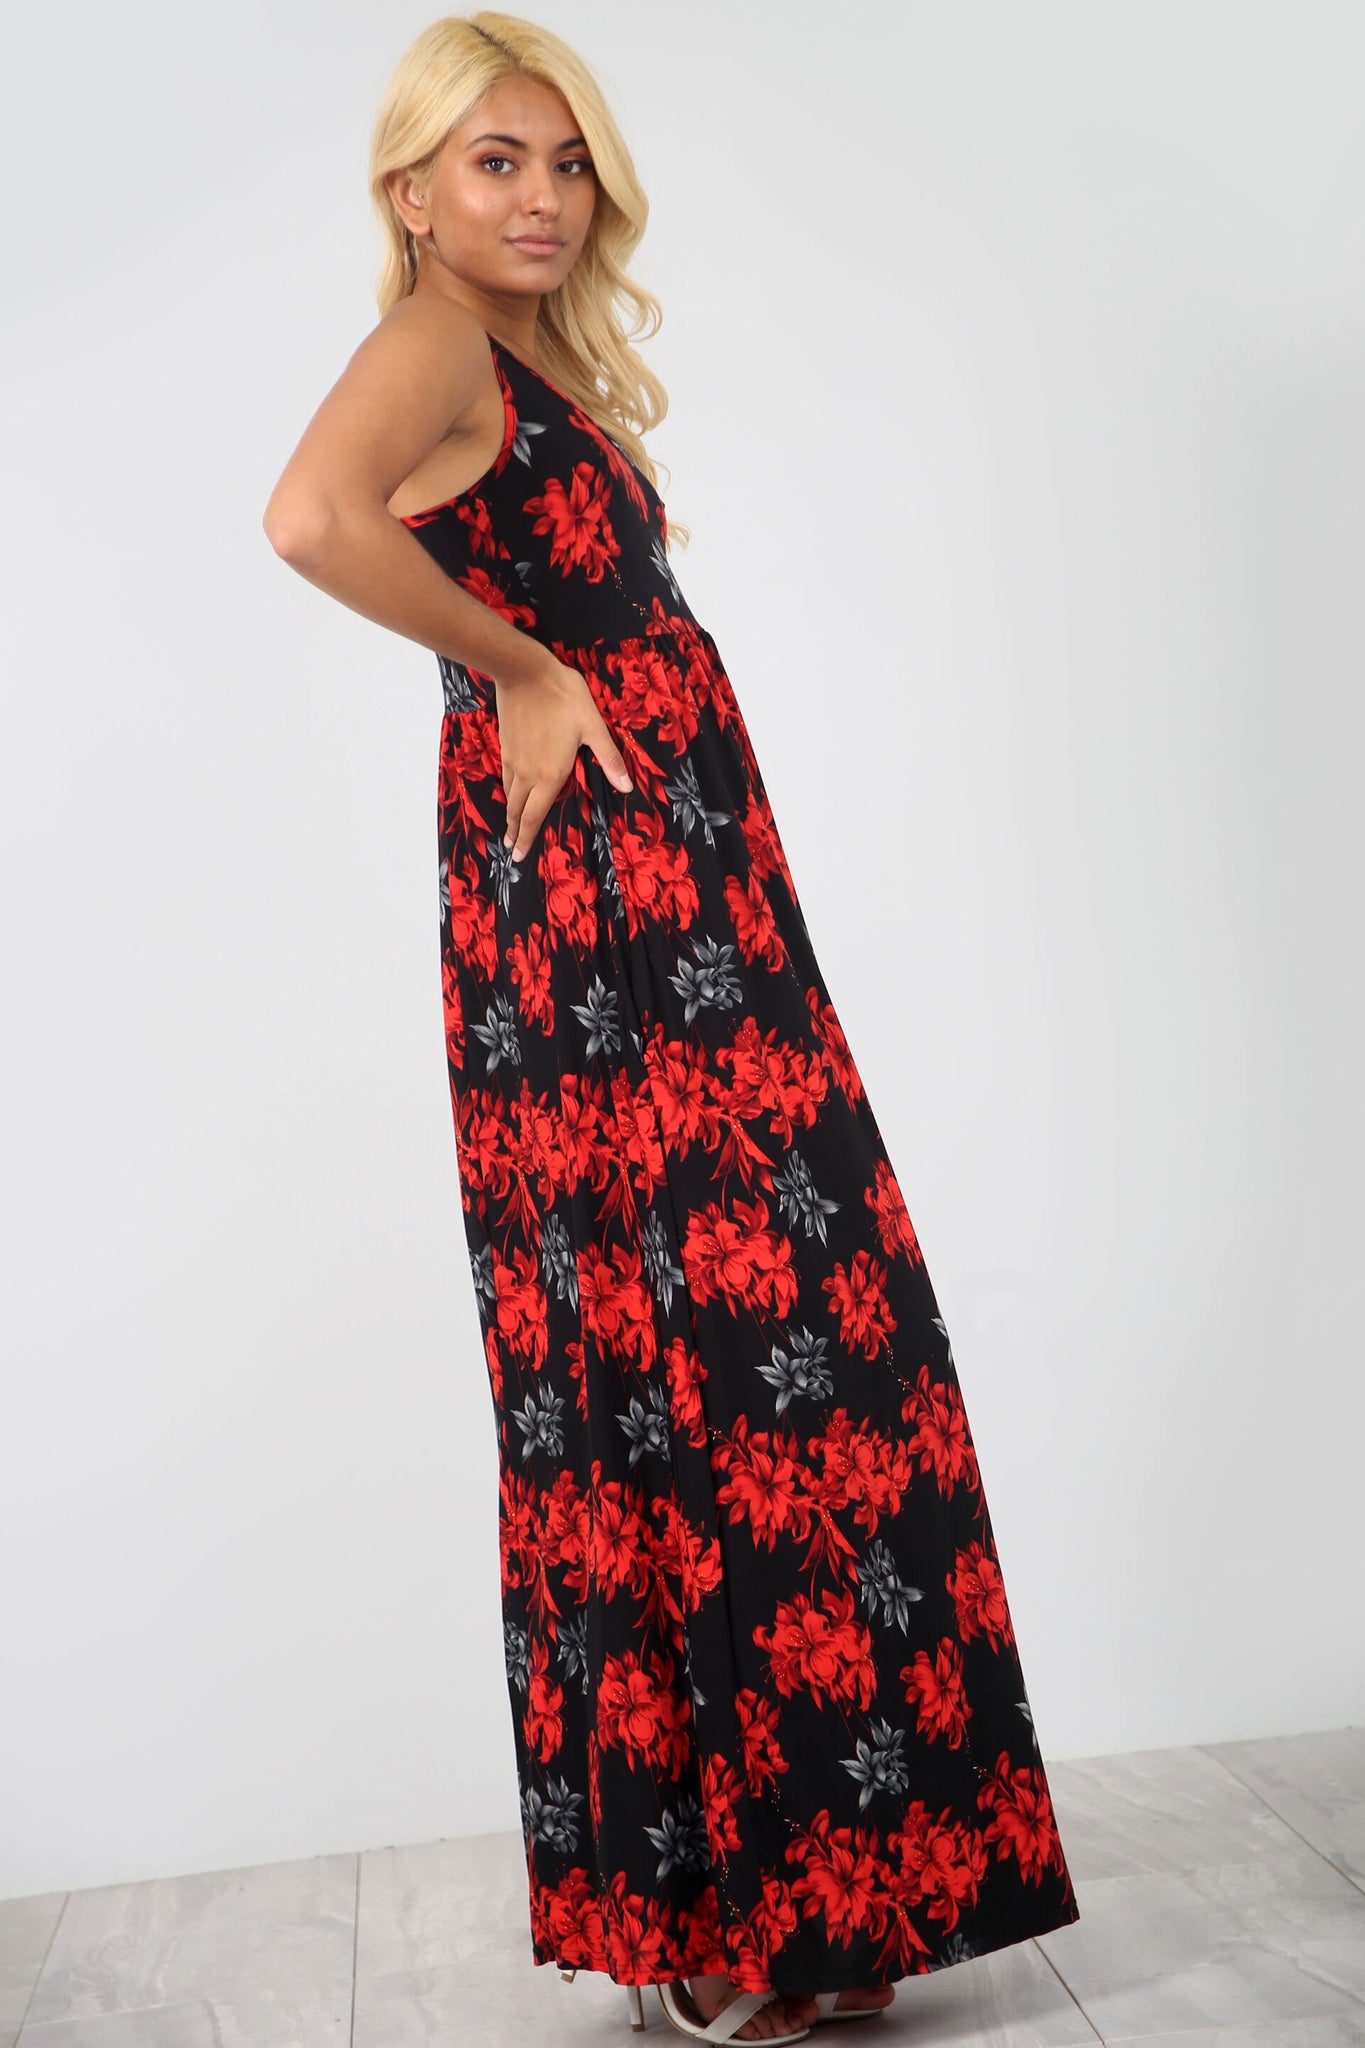 Sleeveless Red Floral Maxi Dress With Pockets - bejealous-com